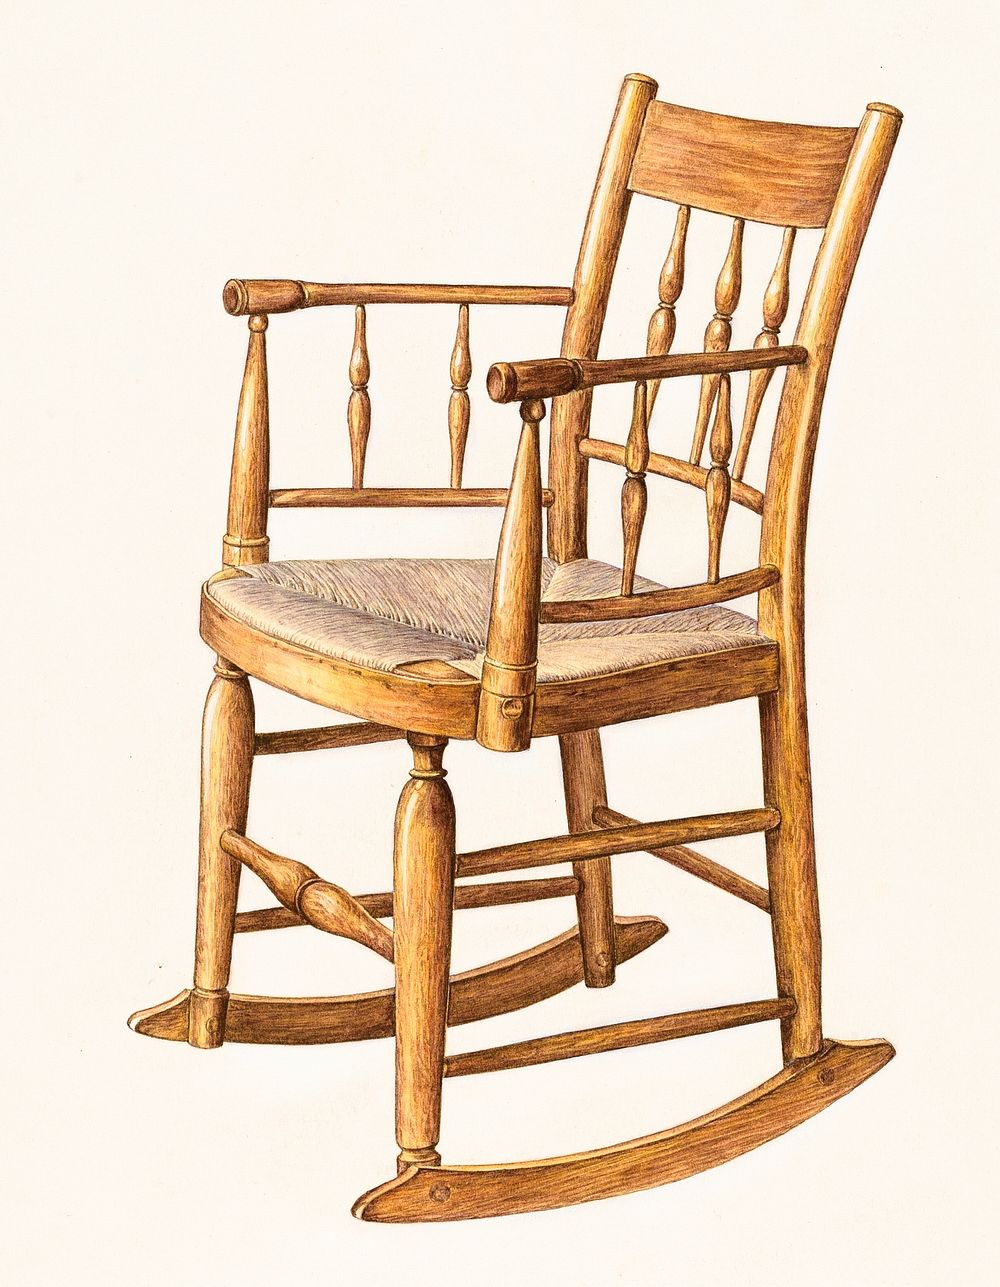 Rocking Chair (c. 1938) by Dorothy Handy. Original from The National Gallery of Art. Digitally enhanced by rawpixel.